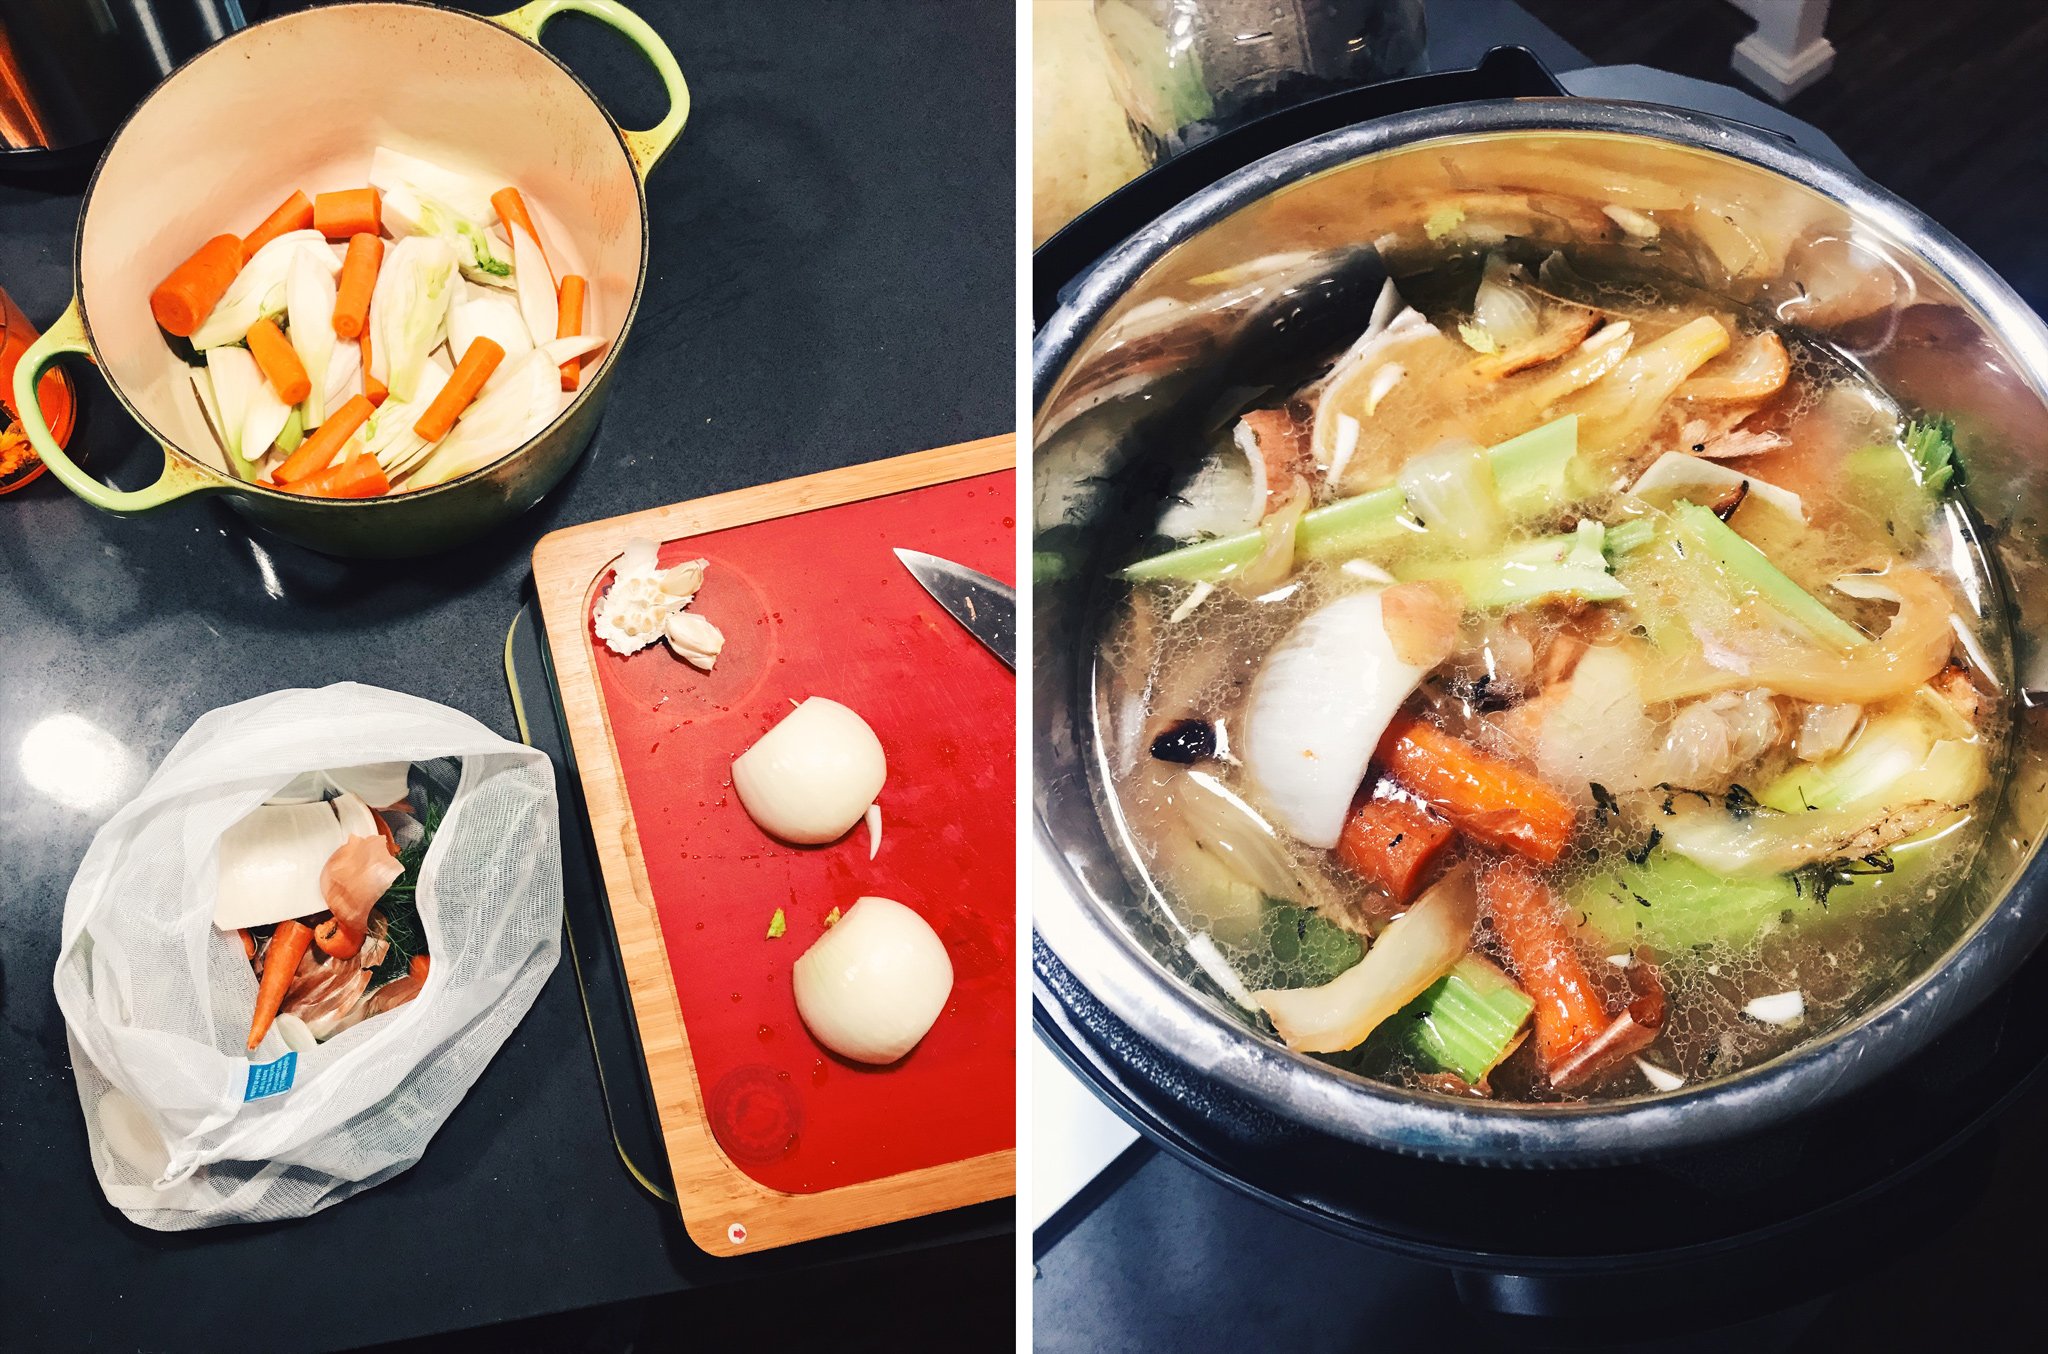 Saved veggies scraps when cutting up vegetables are used in the Instant Pot to make broth.